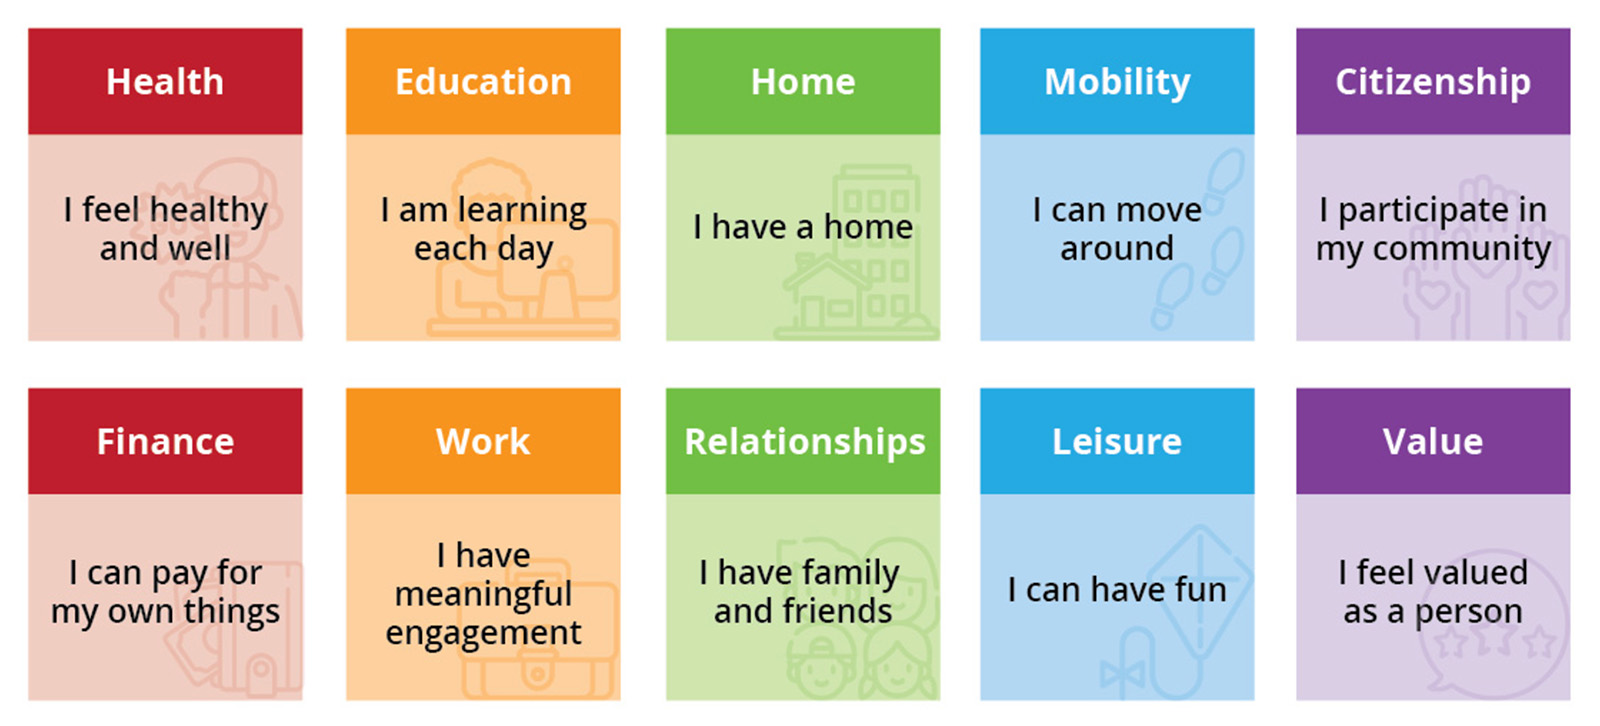 Simplified Quality of Life Framework